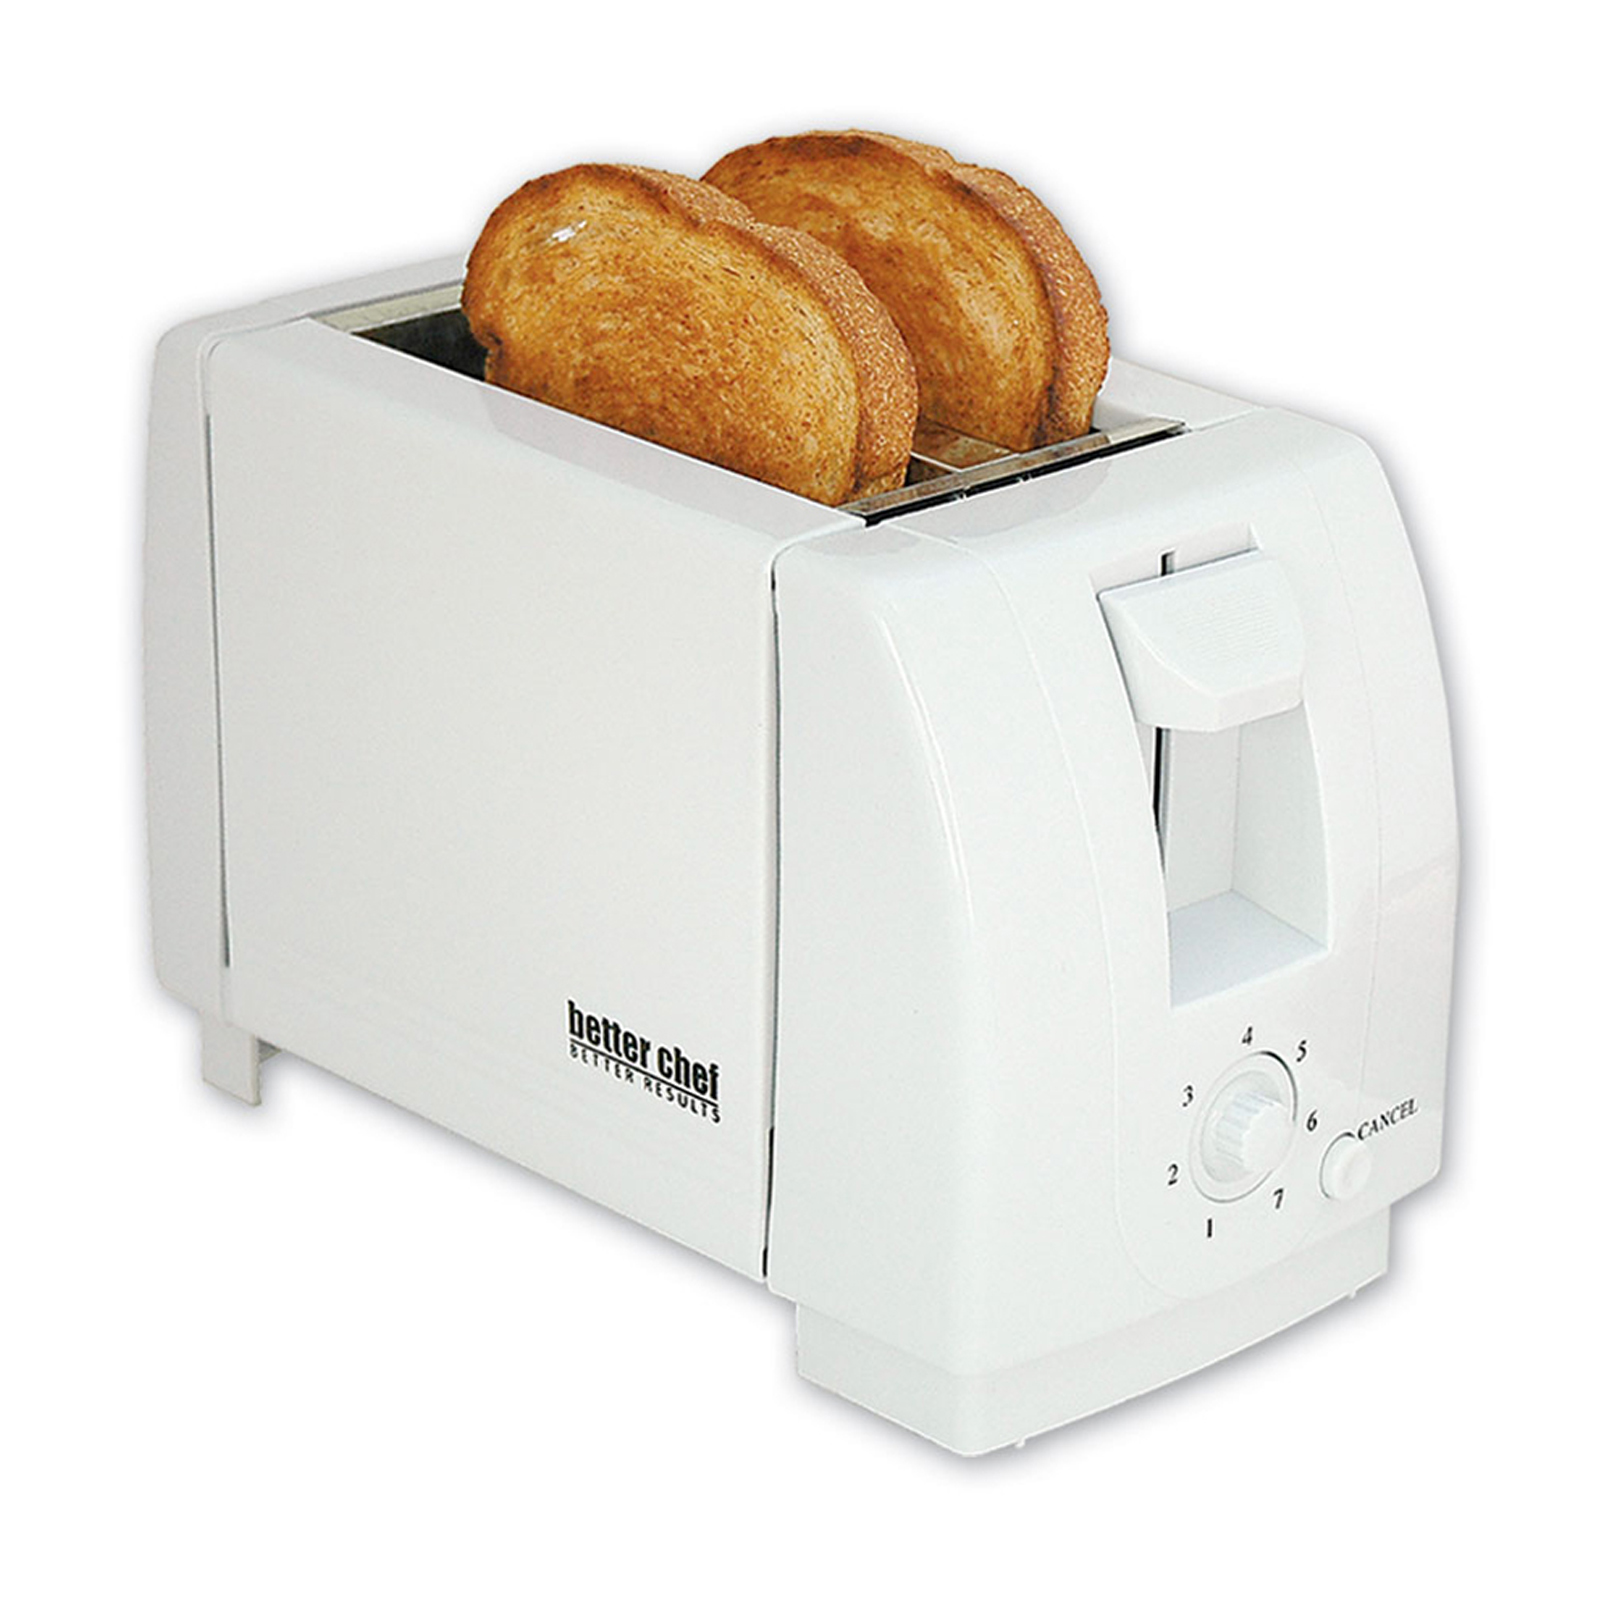 Better Chef 97080182M 2-Slice Toaster with Wide Slots - White